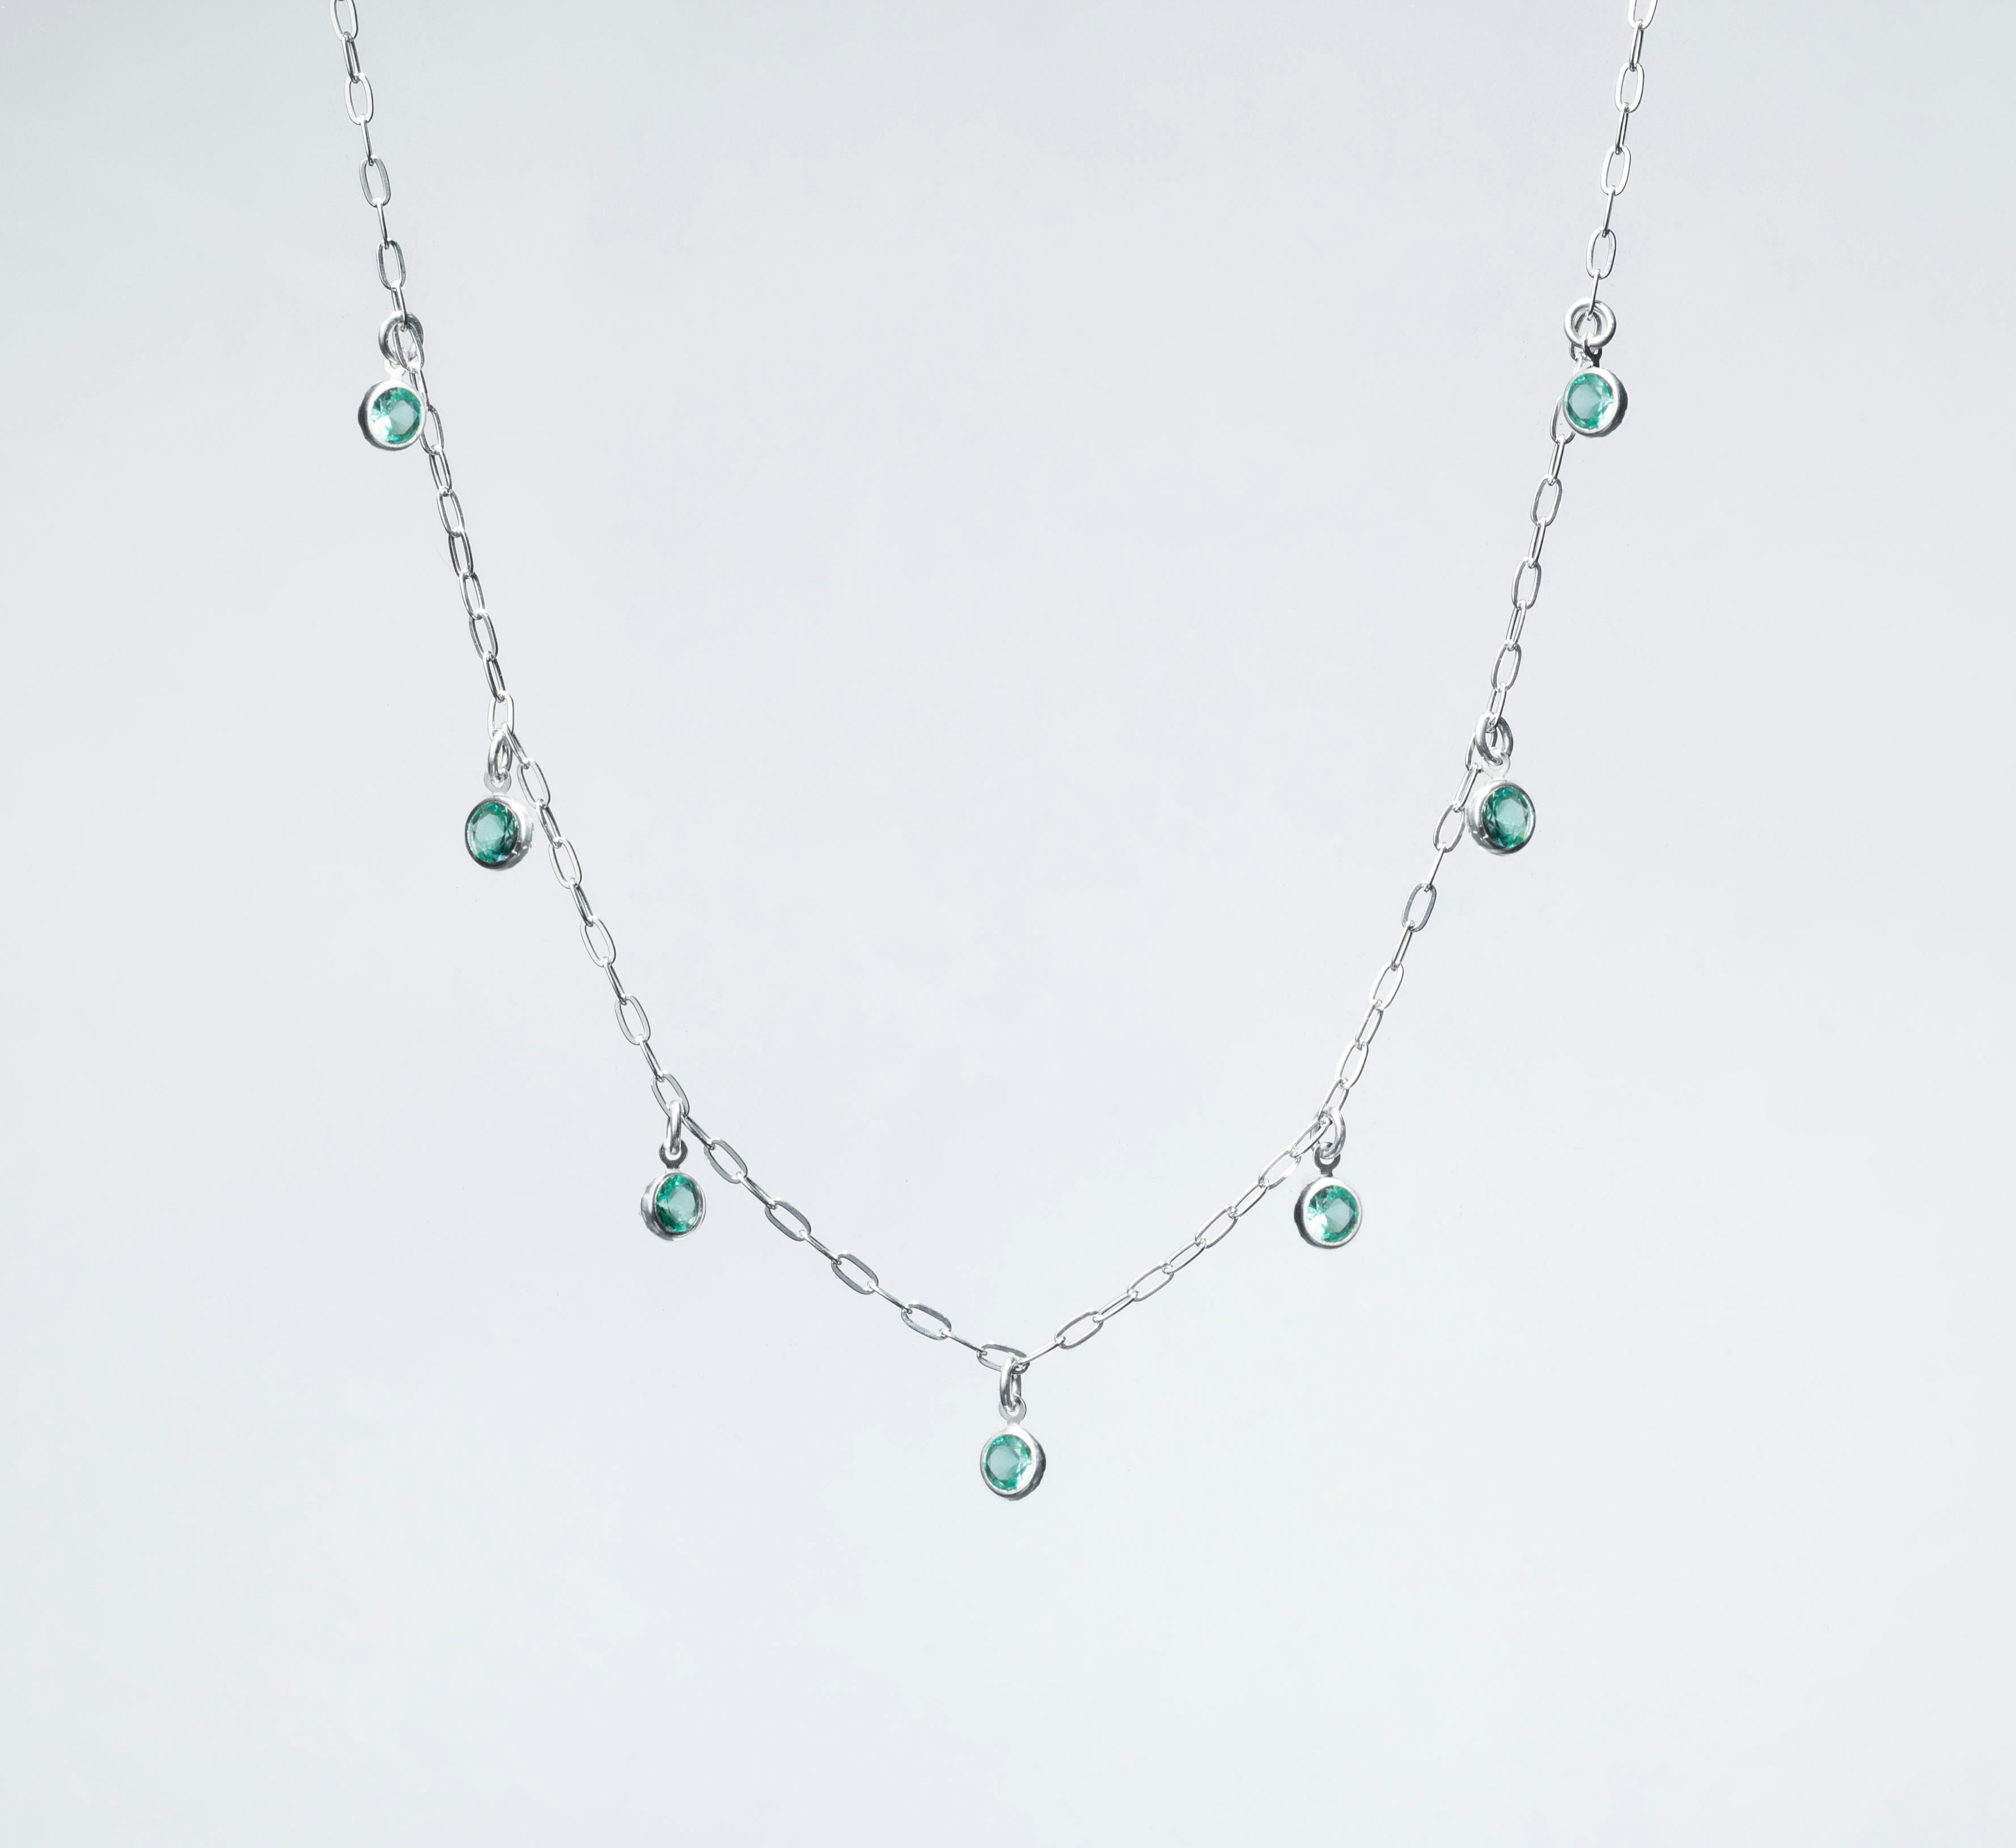 A silver necklace in bright plain background with small green gems